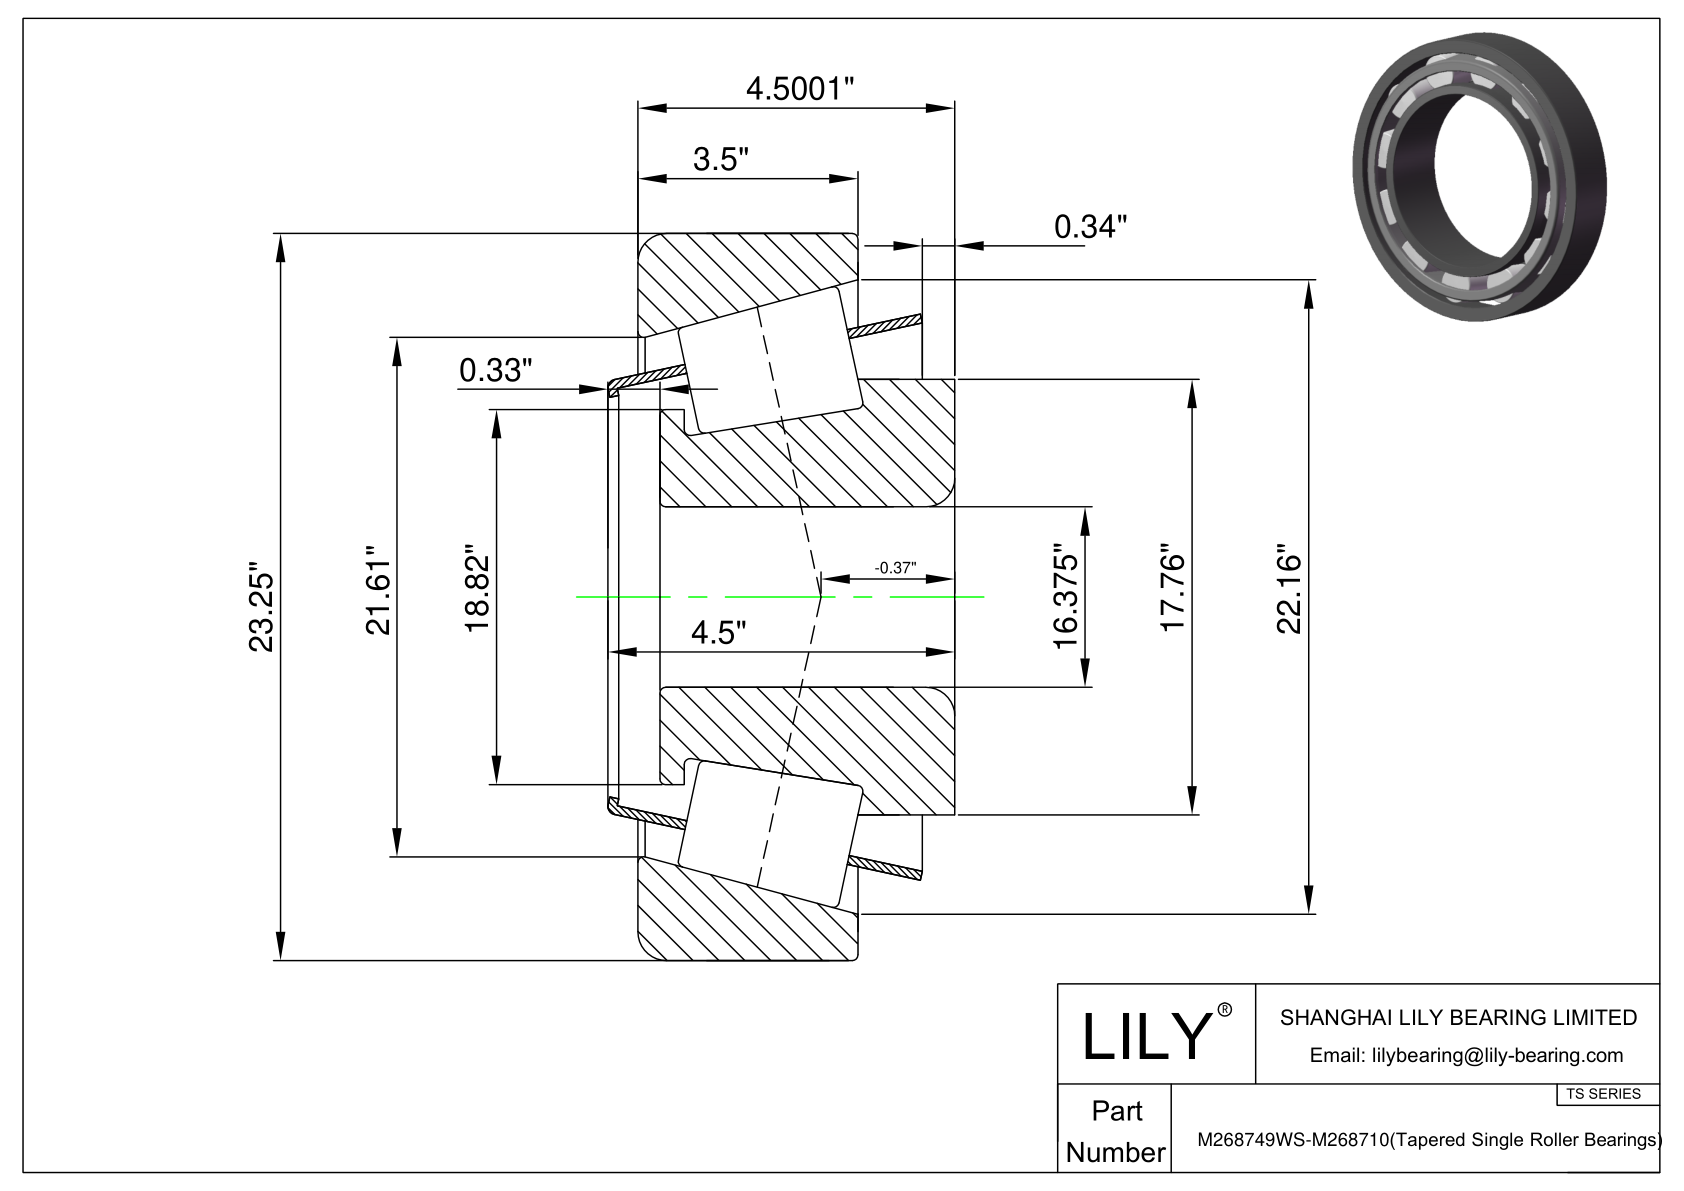 M268749WS-M268710 TS (Tapered Single Roller Bearings) (Imperial) cad drawing